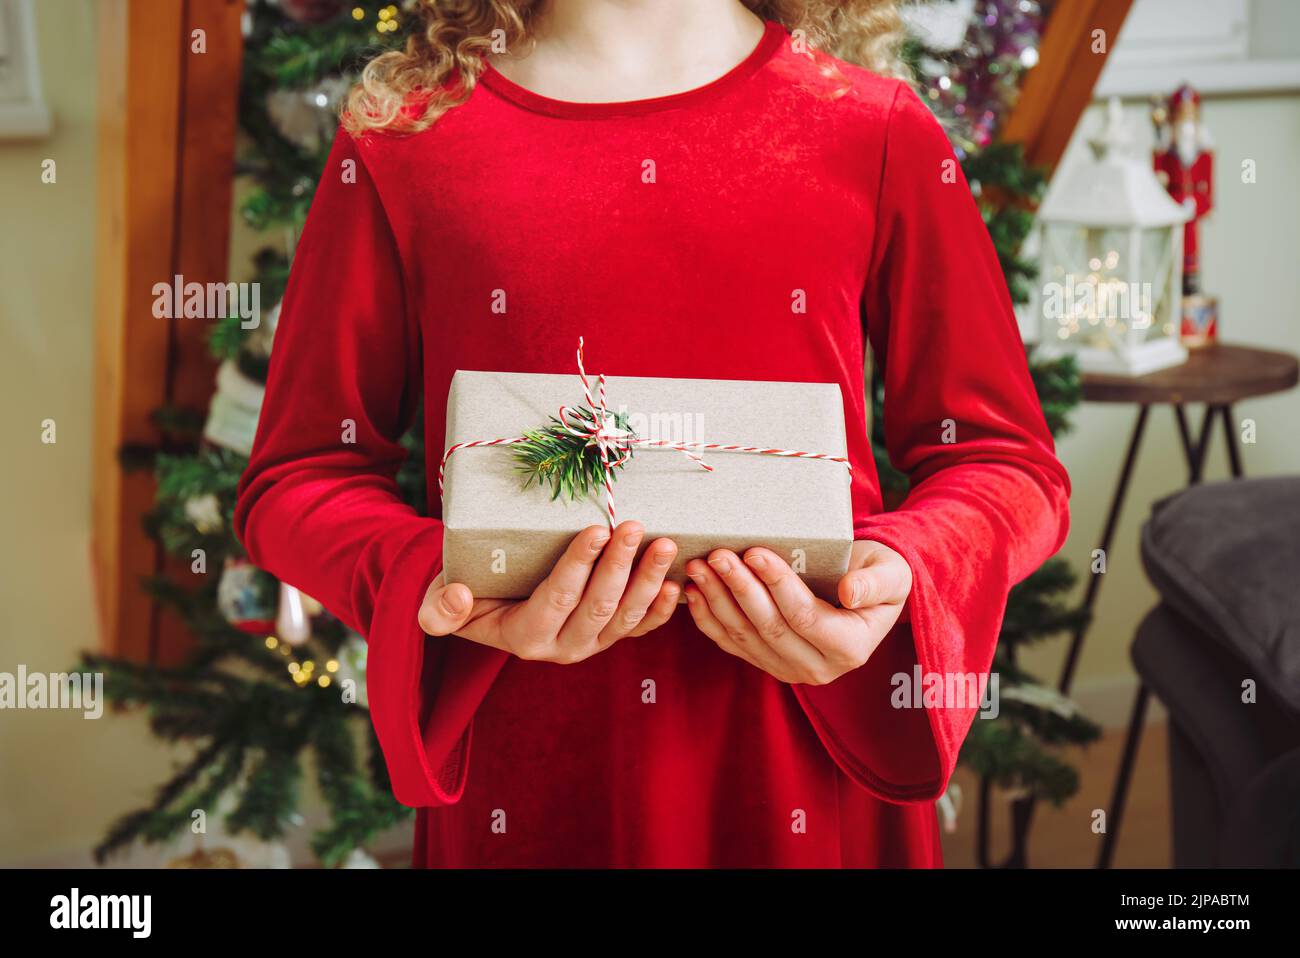 Close up view of girl child holding Christmas present in hands at home. Celebration. Stock Photo